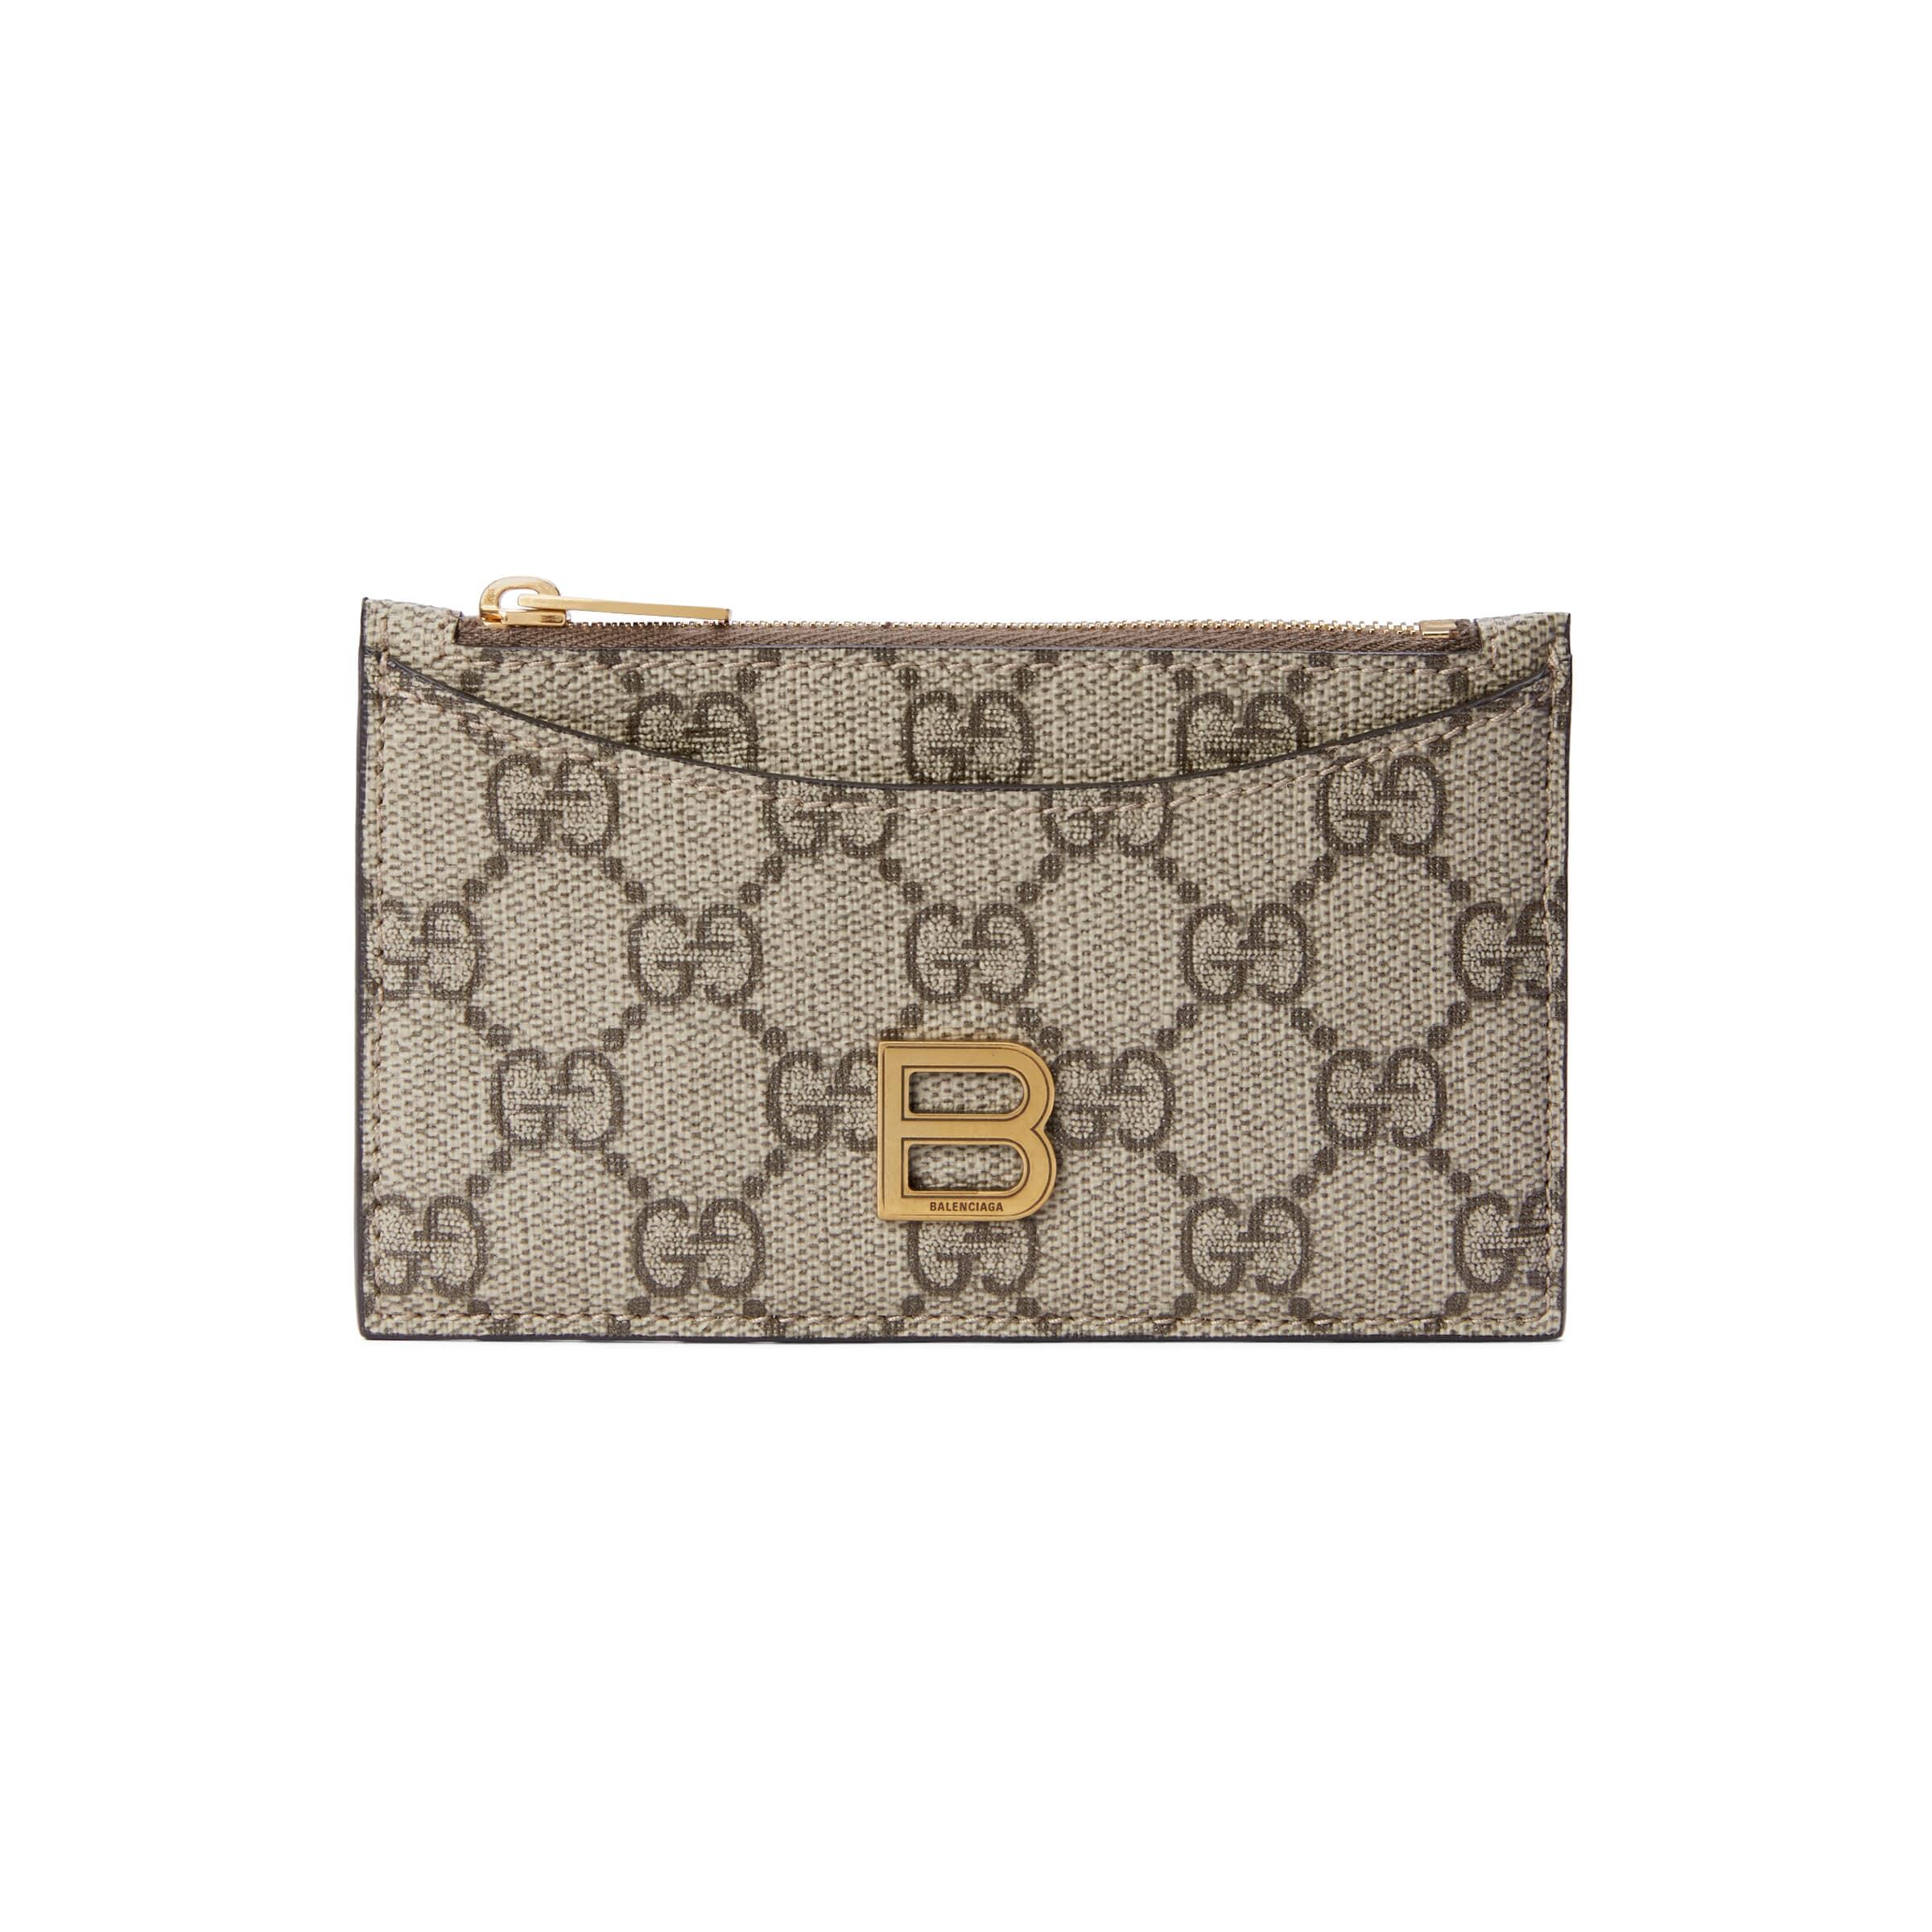 Gucci The Hacker Project Zip Card Case in Natural | Lyst